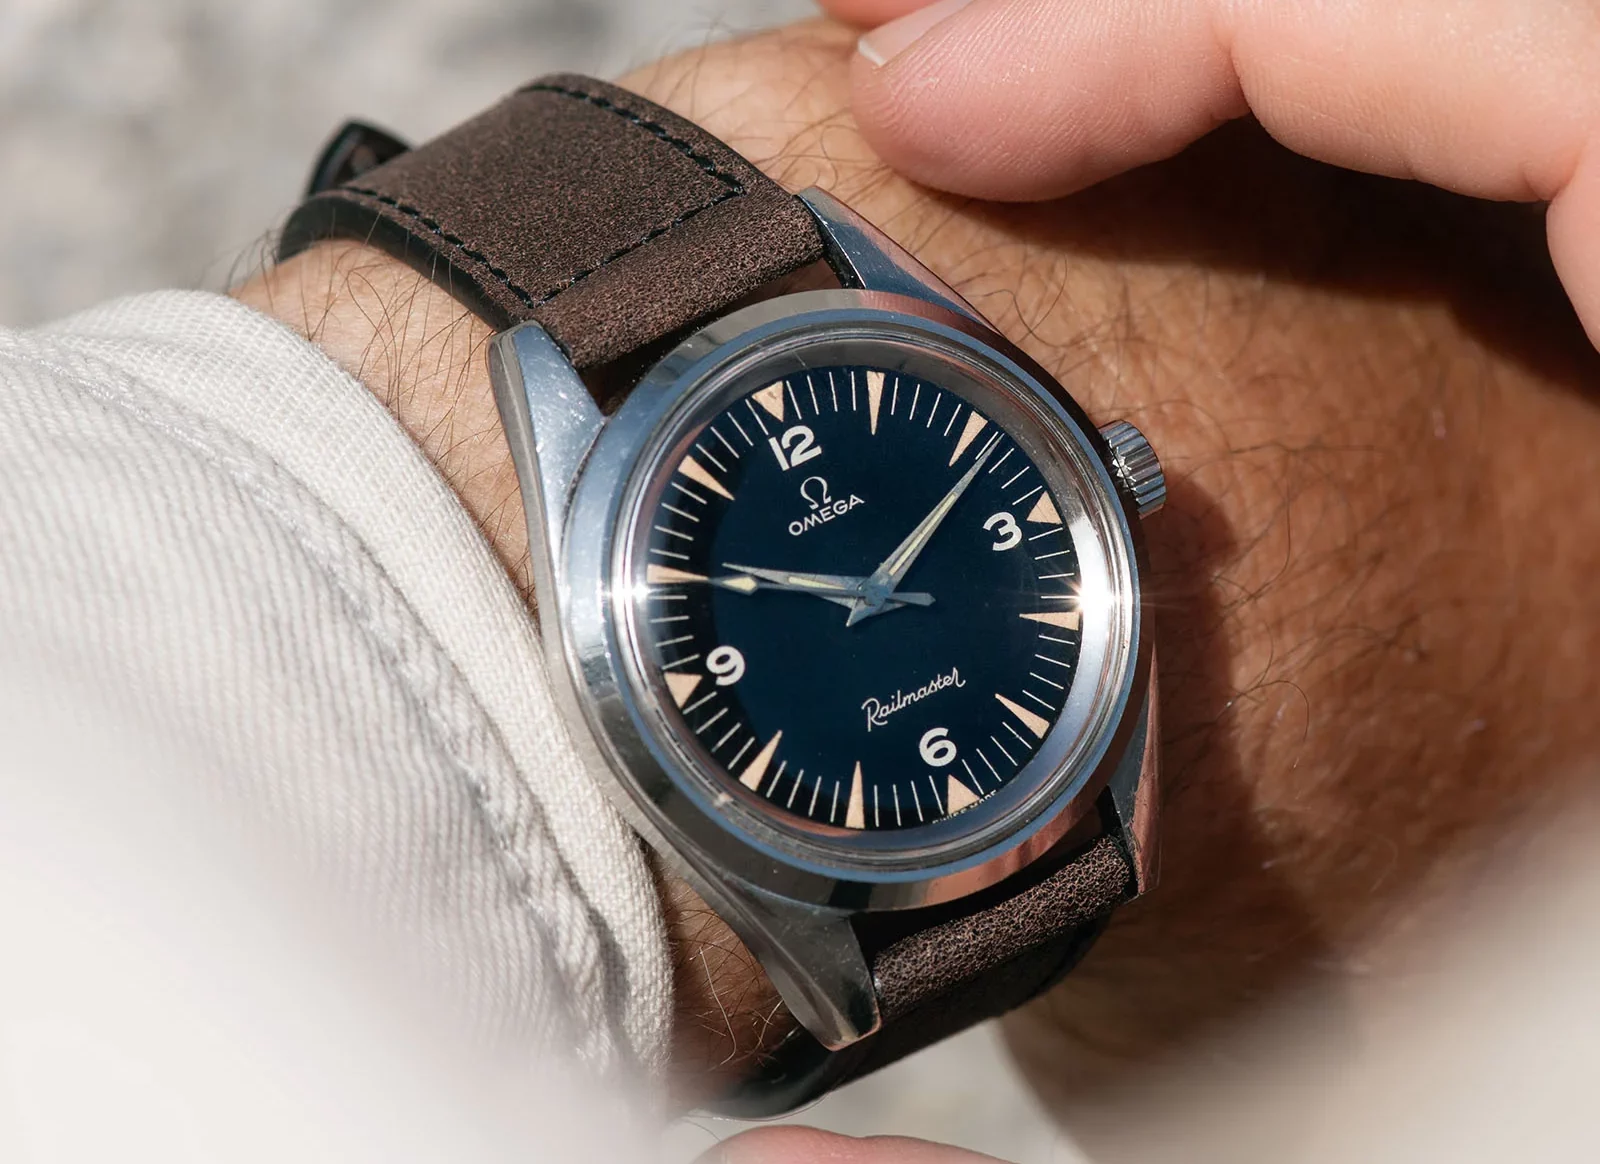 5 best antimagnetic watches - Time and Tide Watches